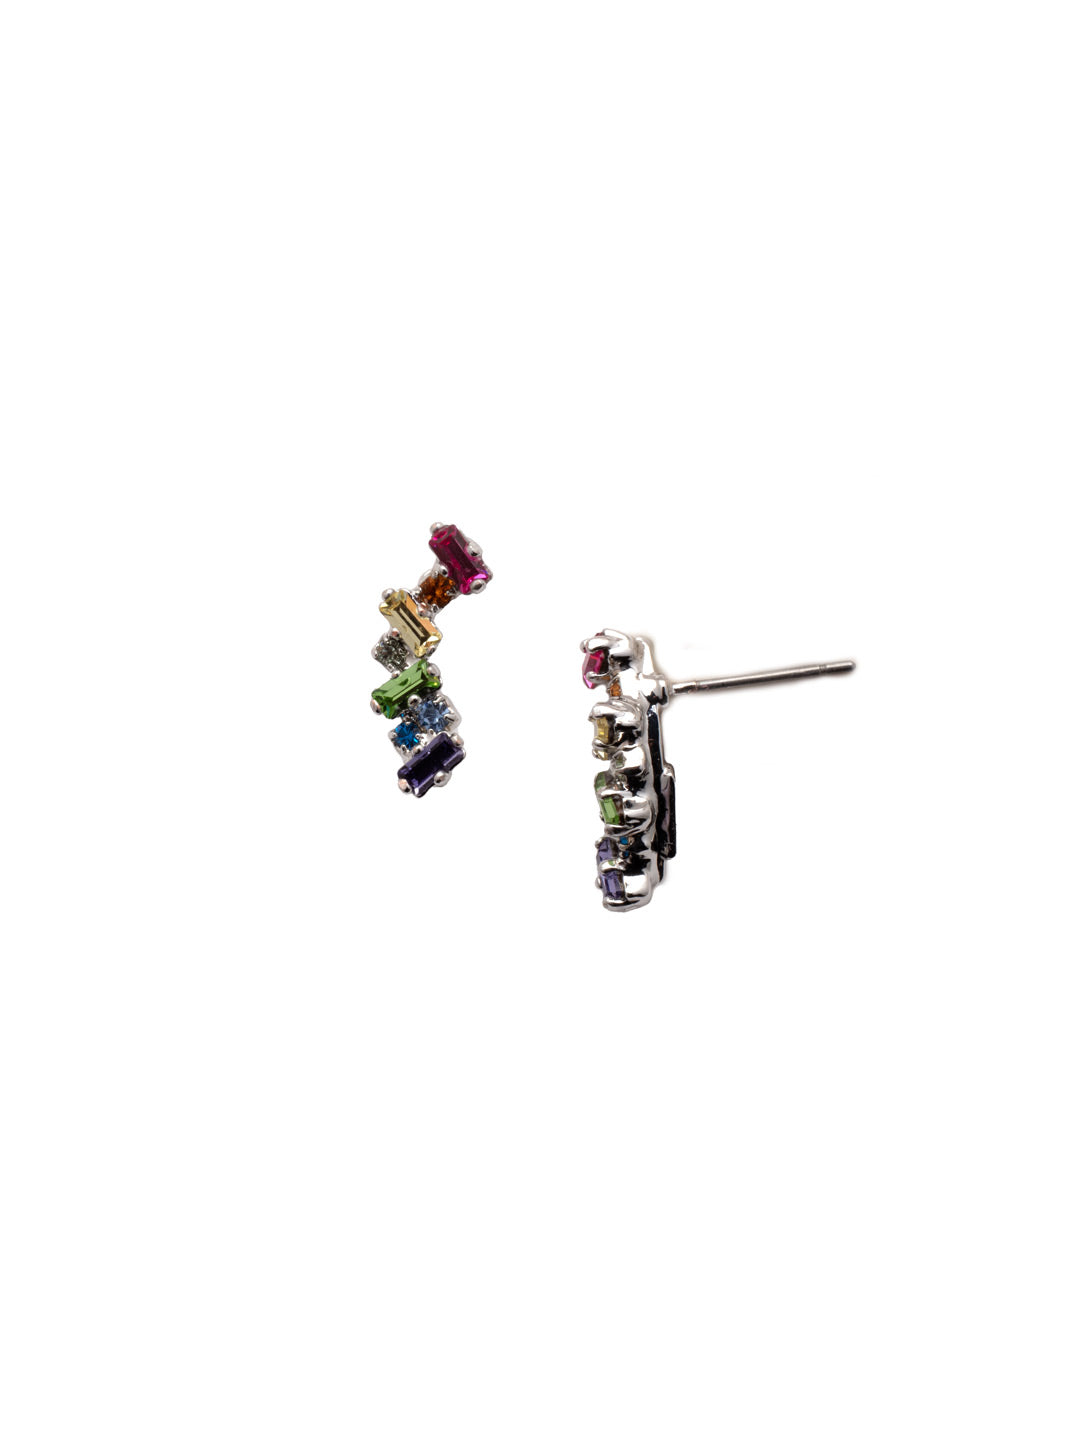 Dotted Line Ear Crawler Stud Earrings - EDM9PDPRI - <p>Baguettes and petite round crystals set in a casual pattern make this crawler the perfect choice for day or evening wear. From Sorrelli's Prism collection in our Palladium finish.</p>